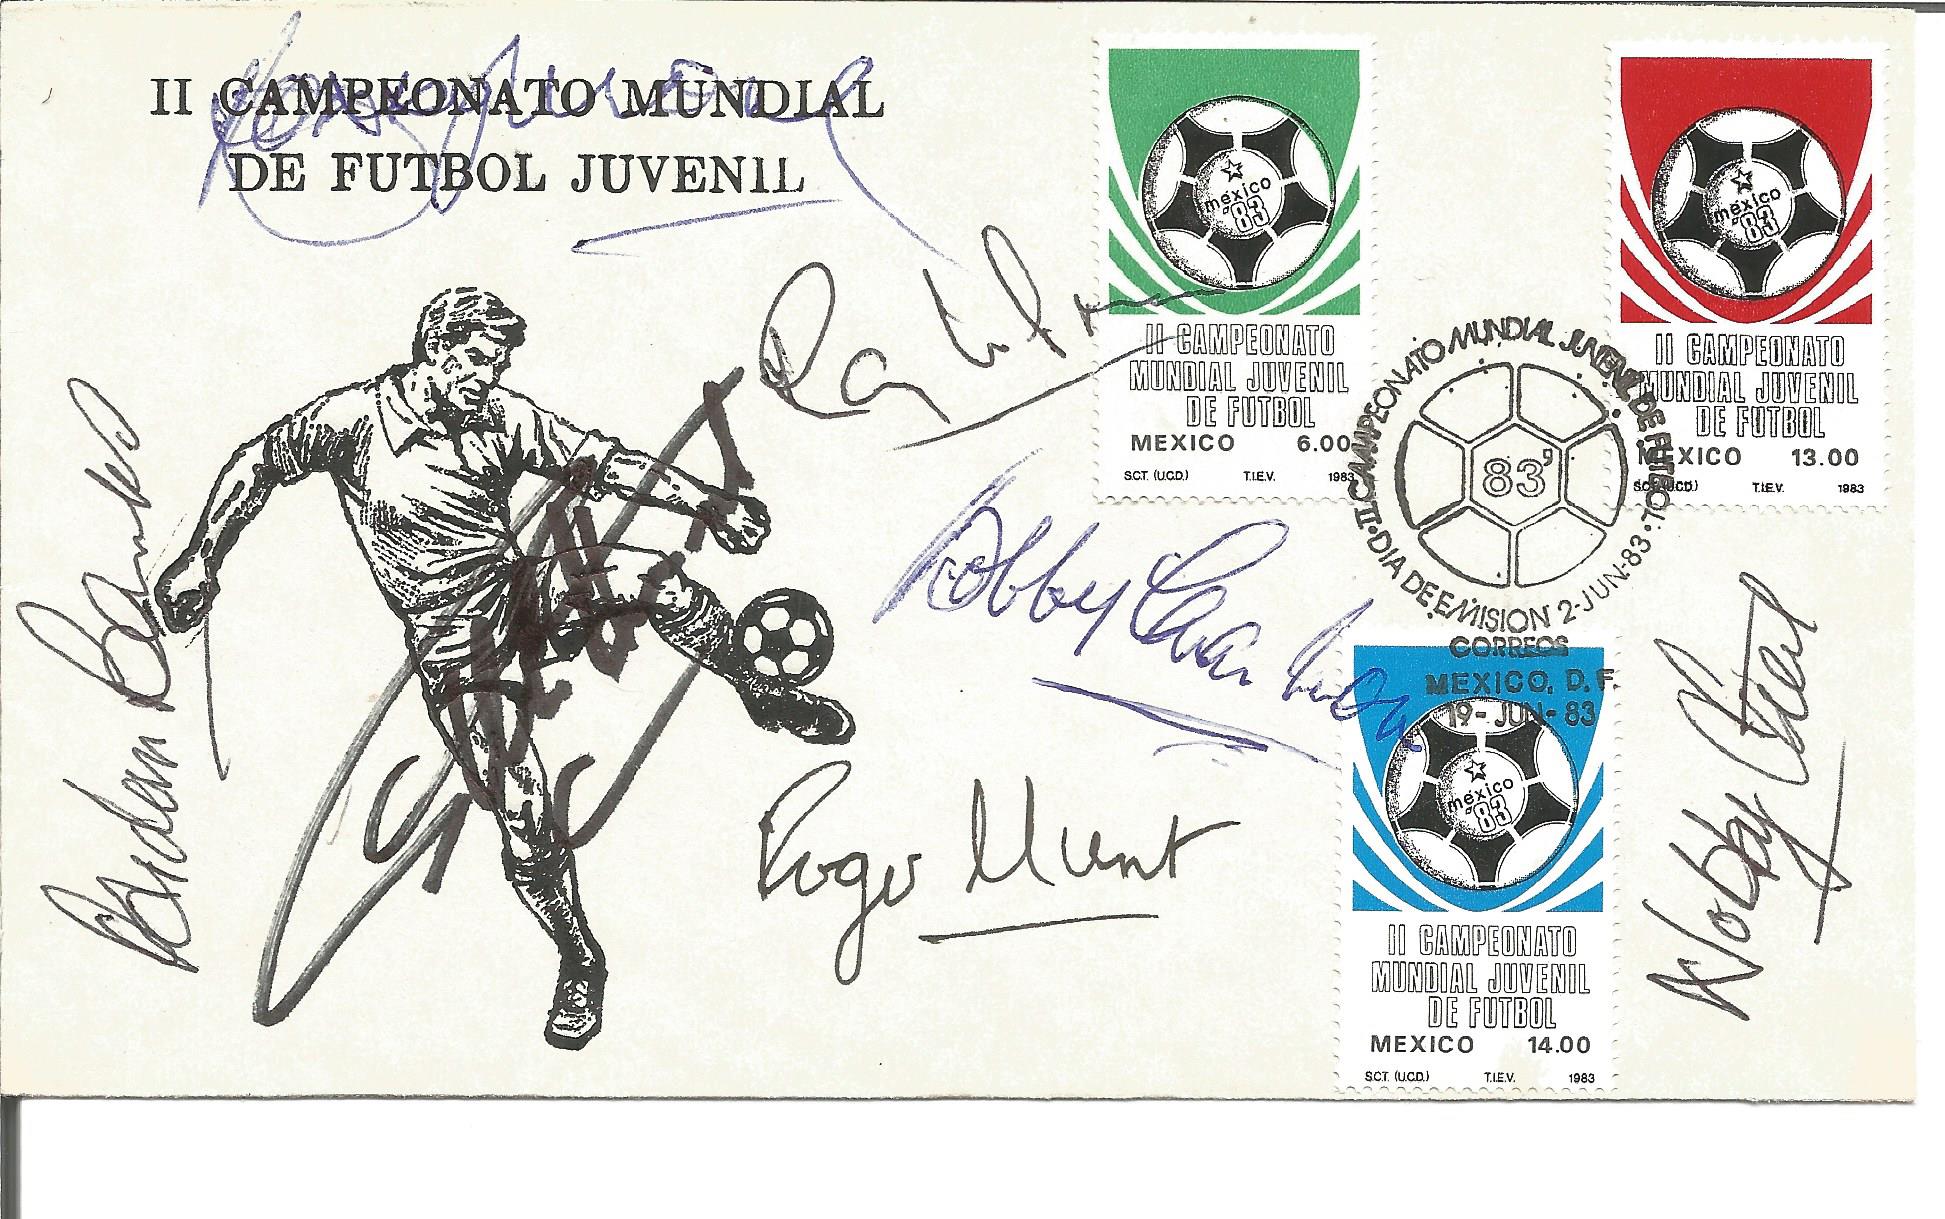 Football II Campeonato Mundial De Futbol Juvenil FDC signed by 7 members of the England 1966 world